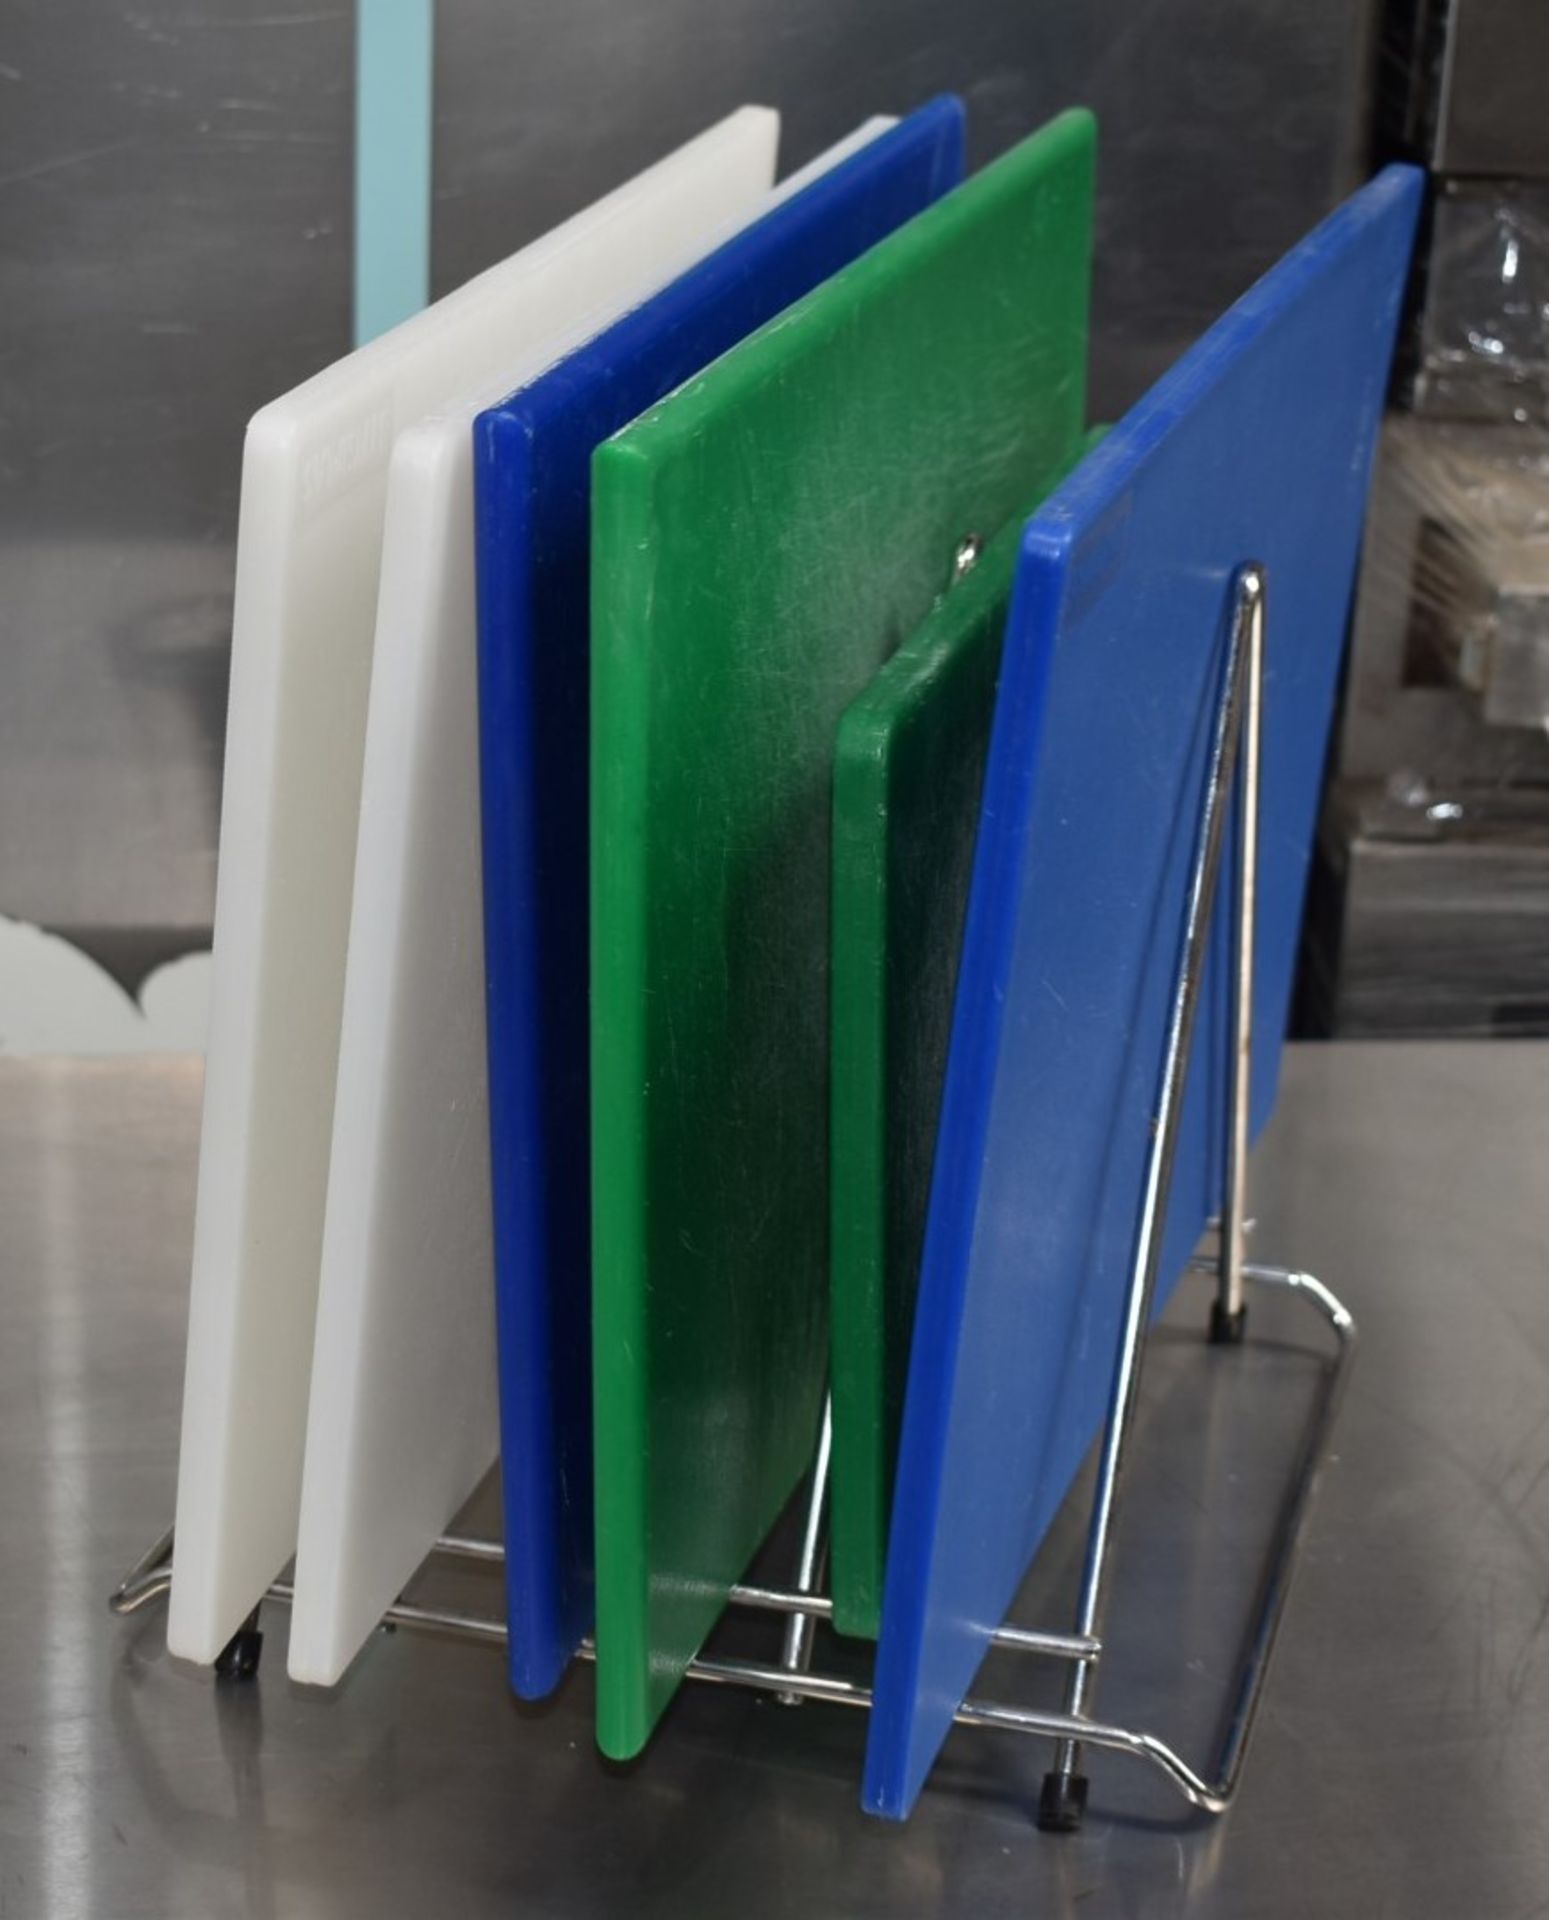 6 x Colour Coded Chopping Boards For Commercial Kitchens - Hygienic Plastic Design With Stand - Image 7 of 8